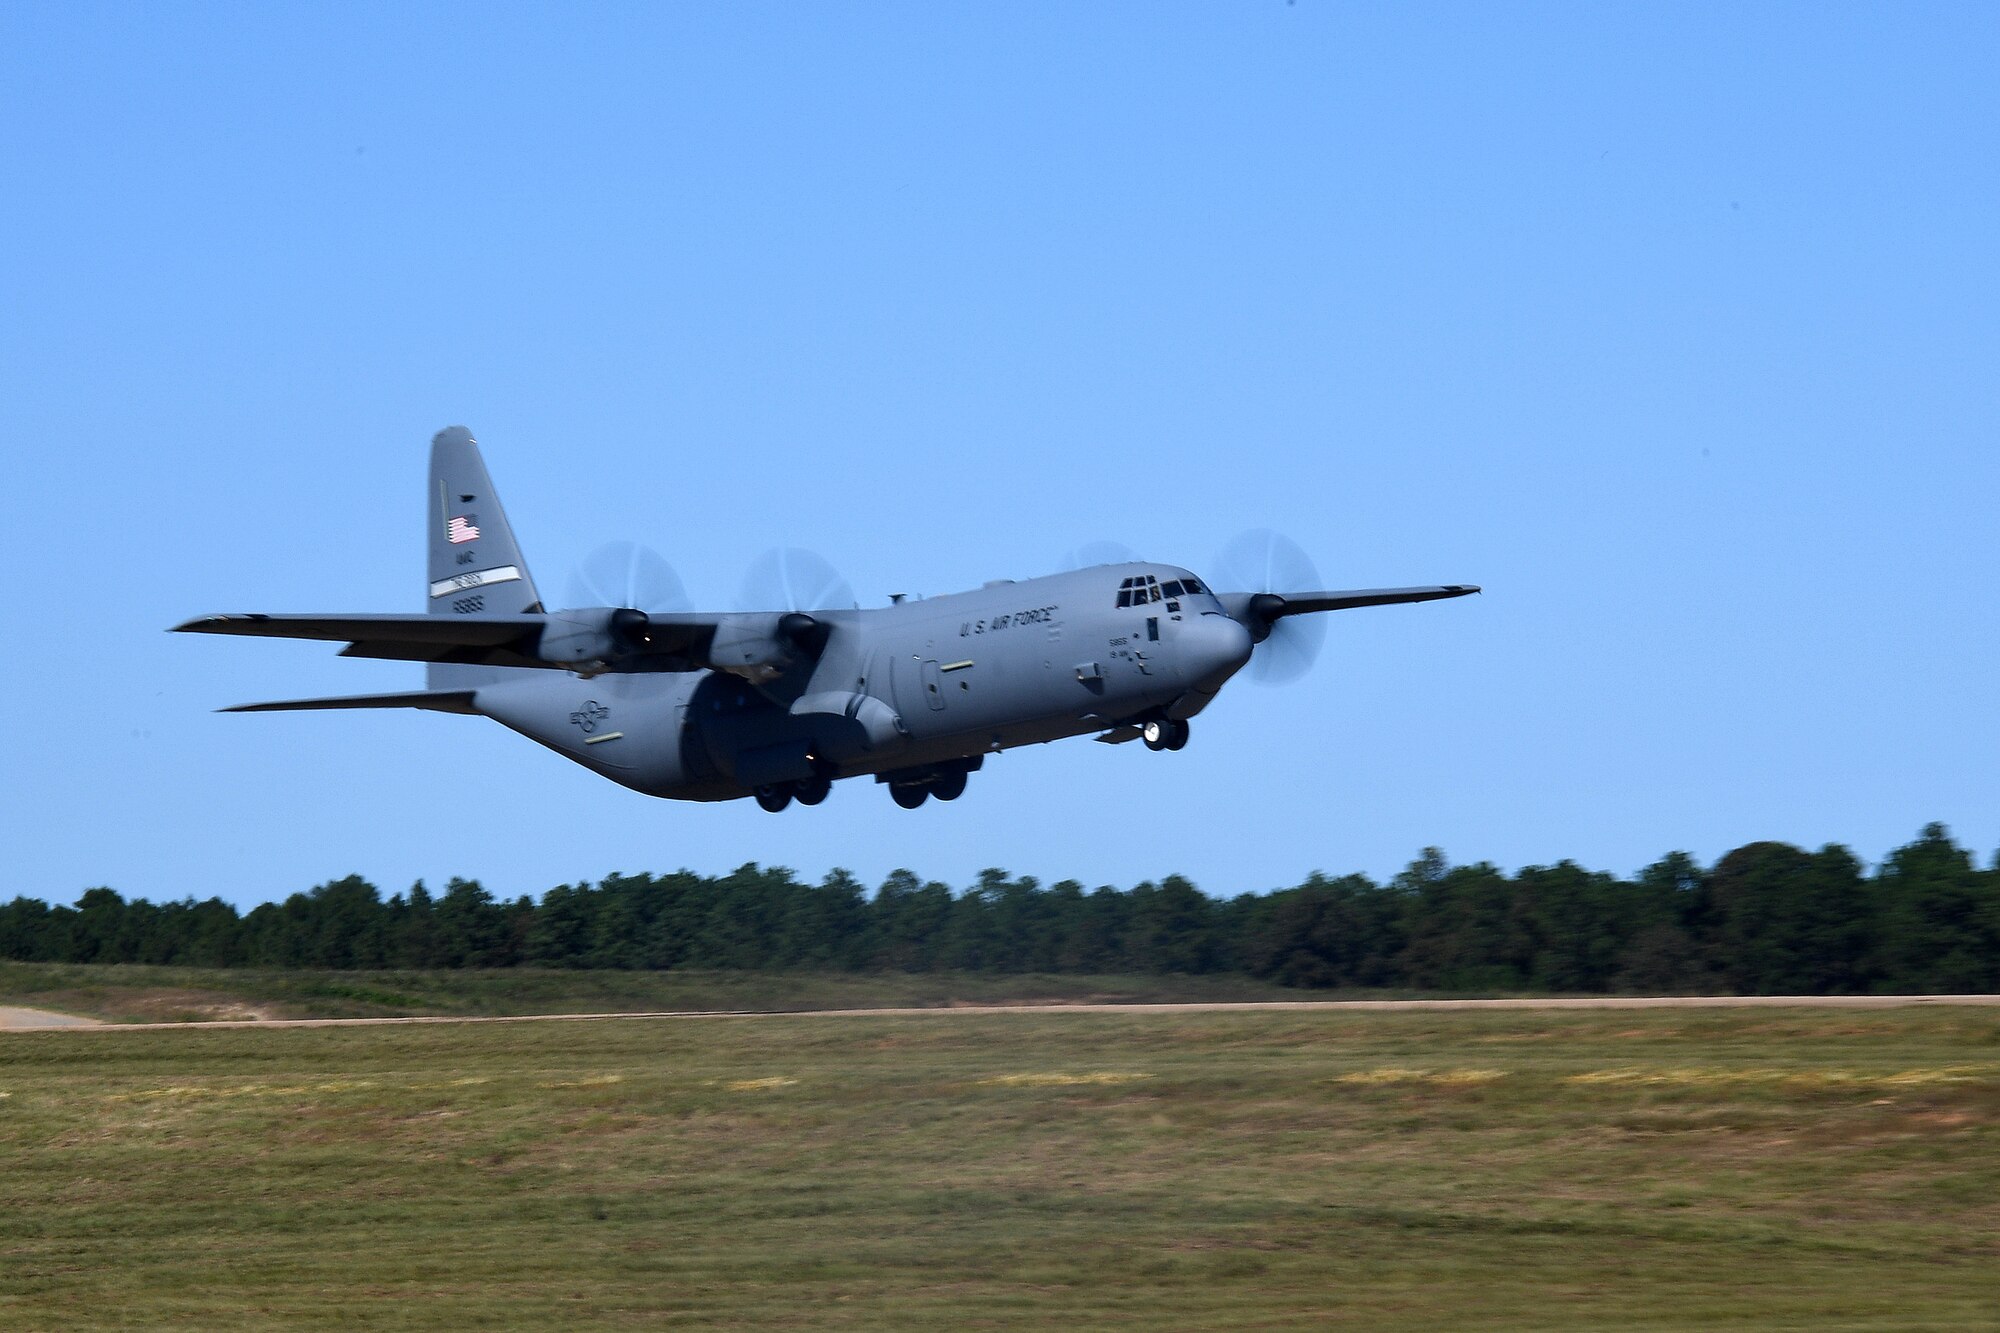 A U.S. Air Force C-130 Hercules aircraft from Little Rock Air Force Base, Arkansas, departs Geronimo Landing Zone during a mission in support of exercise Green Flag Little Rock, Oct. 23, 2019, Fort Polk, Louisiana. The primary objective of the exercise is to support the Joint Readiness Training Center and provide the maximum number of airlift crews, mission planners and ground support elements to a simulated combat environment with emphasis on joint force integration. (U.S. Air Force photo by Tech. Sgt. Liliana Moreno)